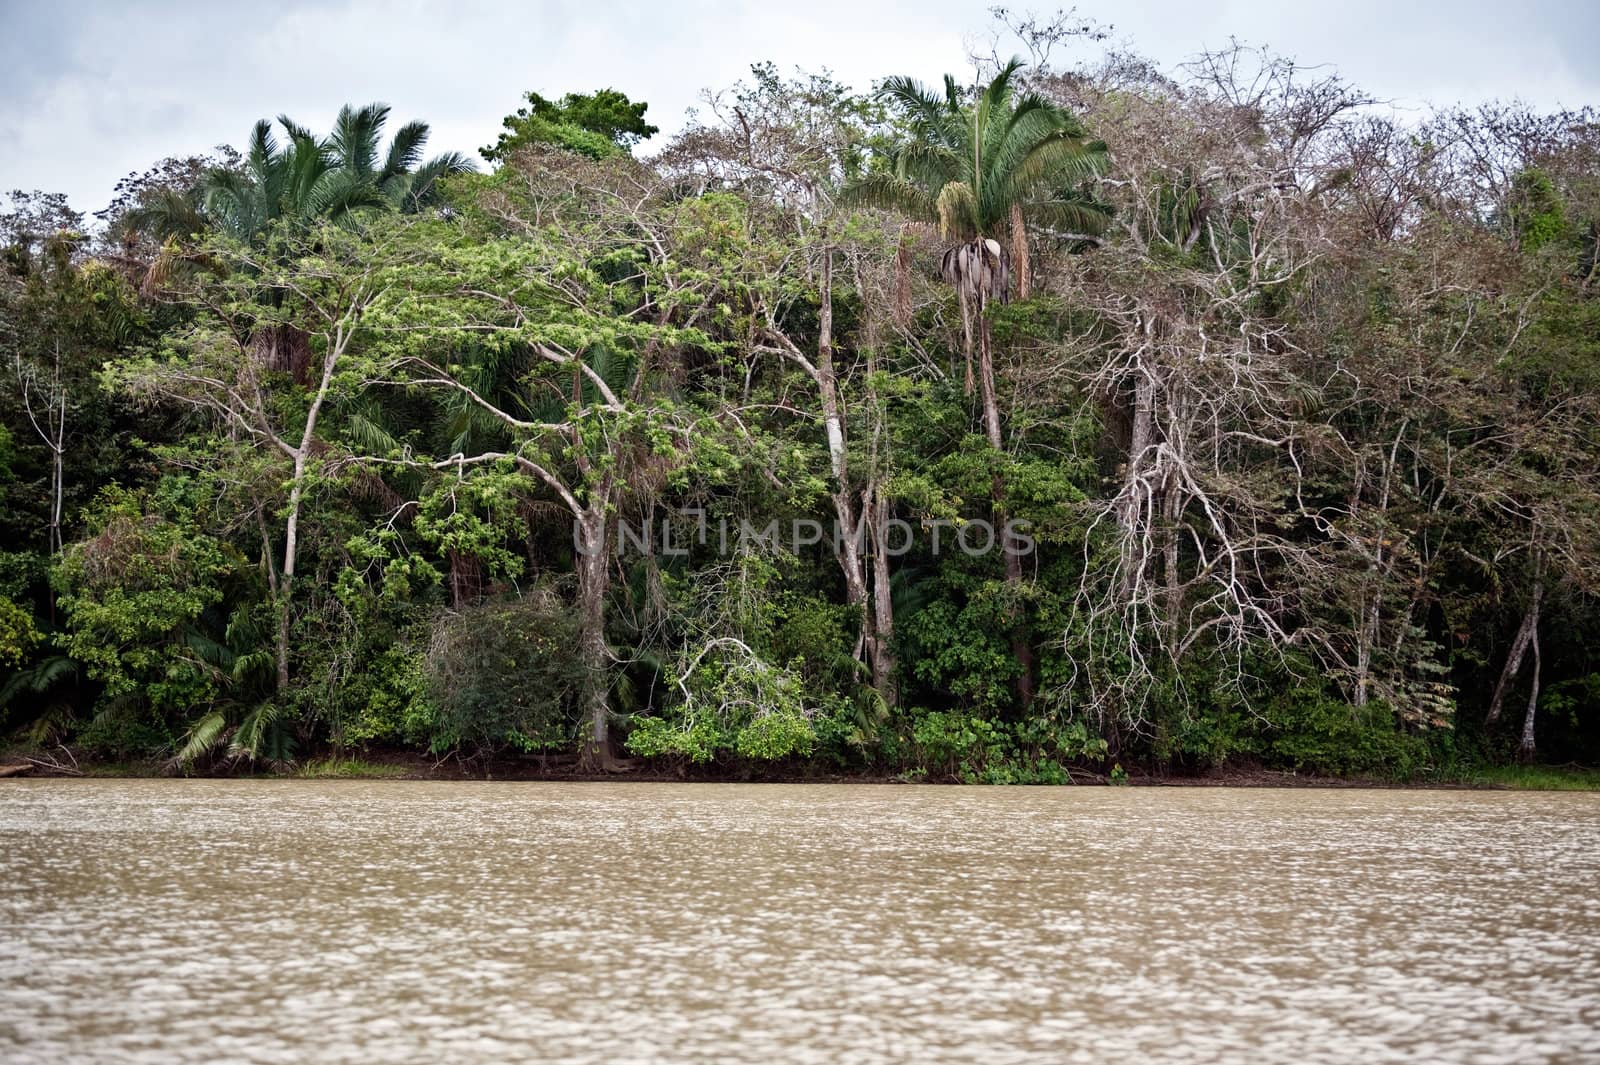 Rainforest landscape in Panama by Marcus